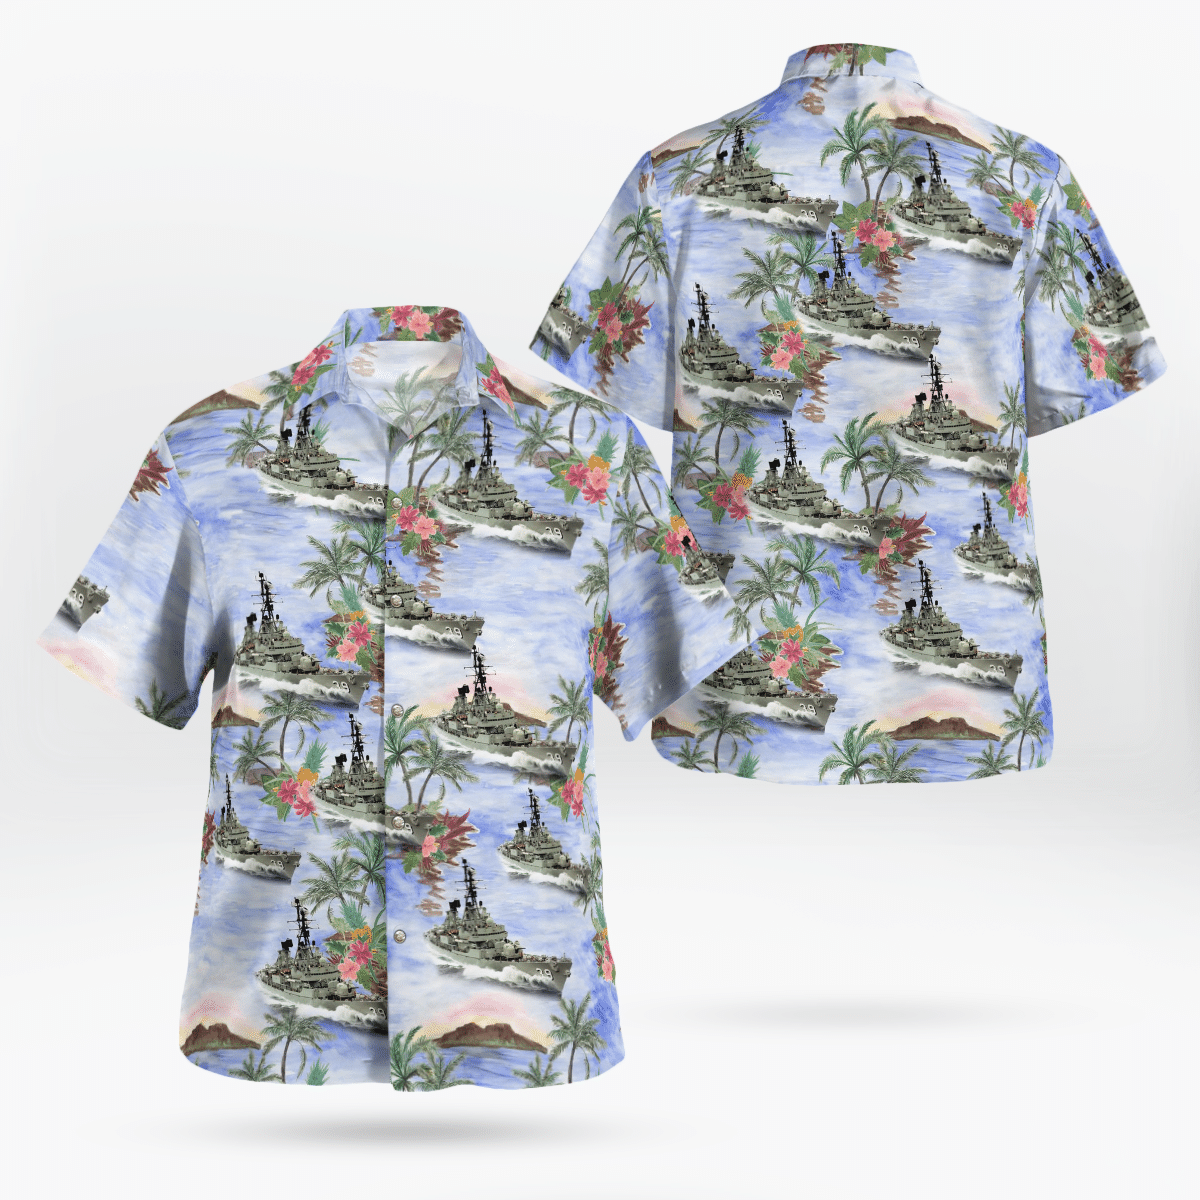 Consider getting these Hawaiian Shirt for your friends 459